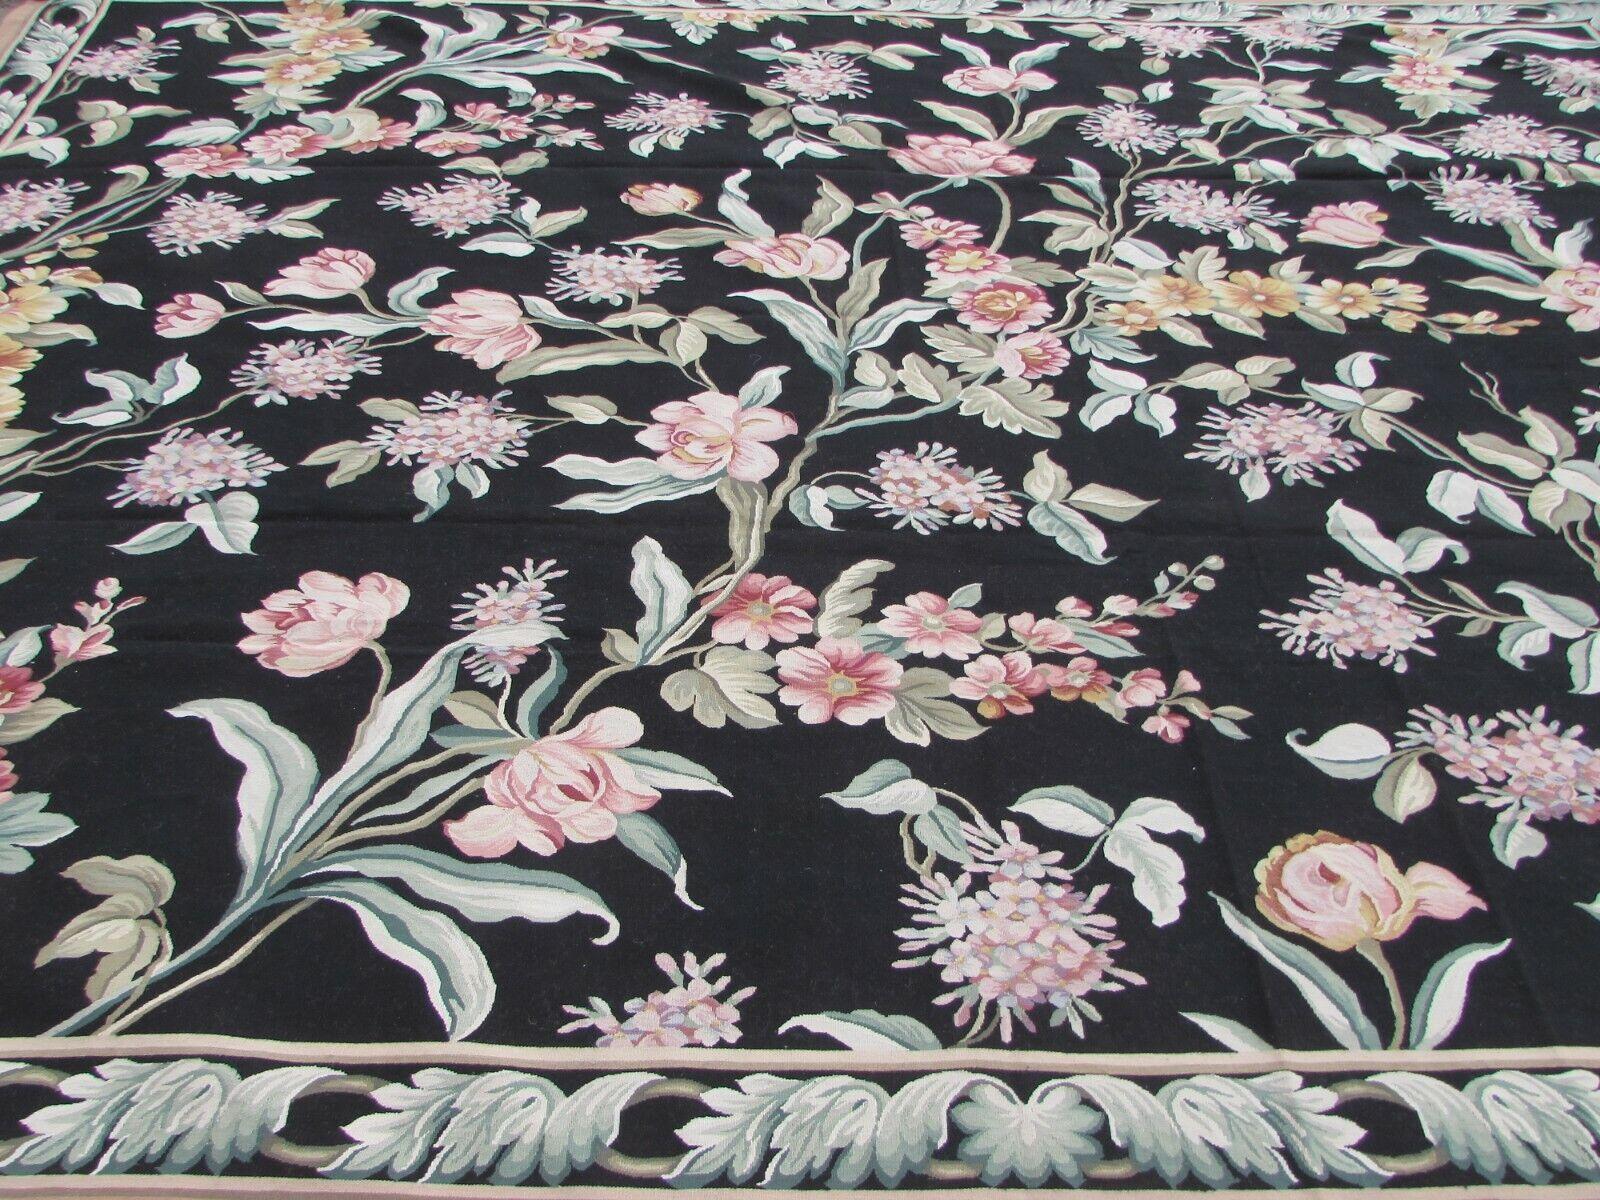 Handmade Vintage French Aubusson Rug 8.8' x 12.2', 1970s, 1Q51 For Sale 6